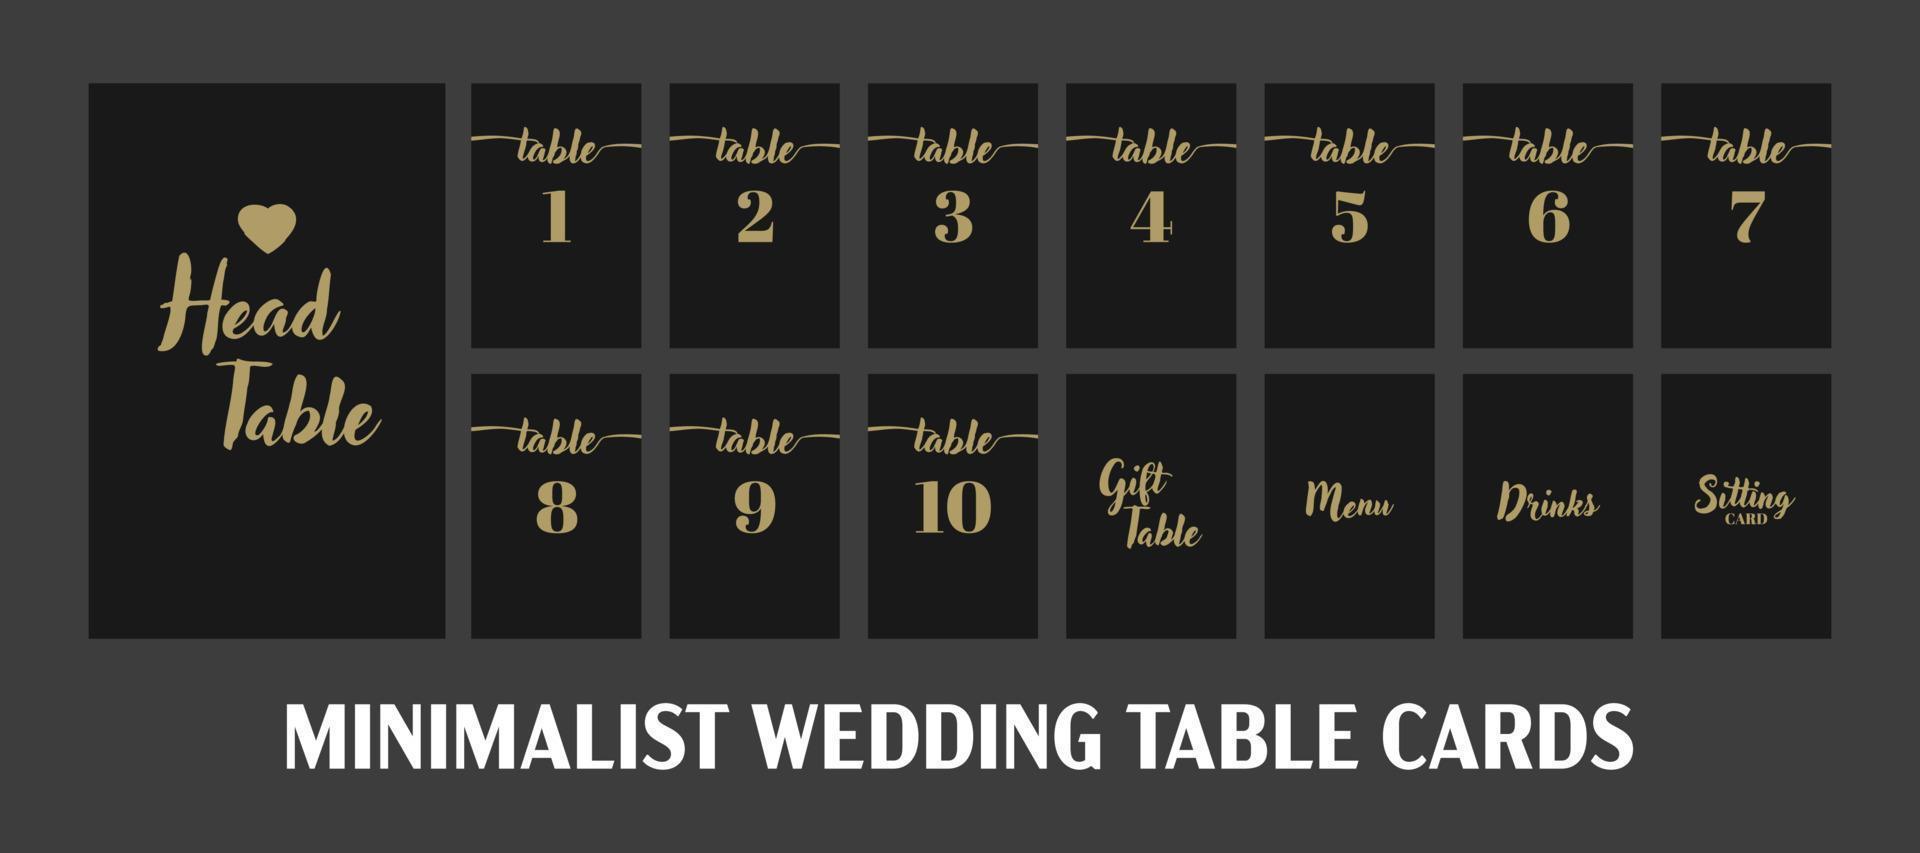 Wedding Table Seating Cards Set, Vector Template with Numbers and Names. Elegant Minimalist Stationary Cards of Black Color and Gold Calligraphy Collection.